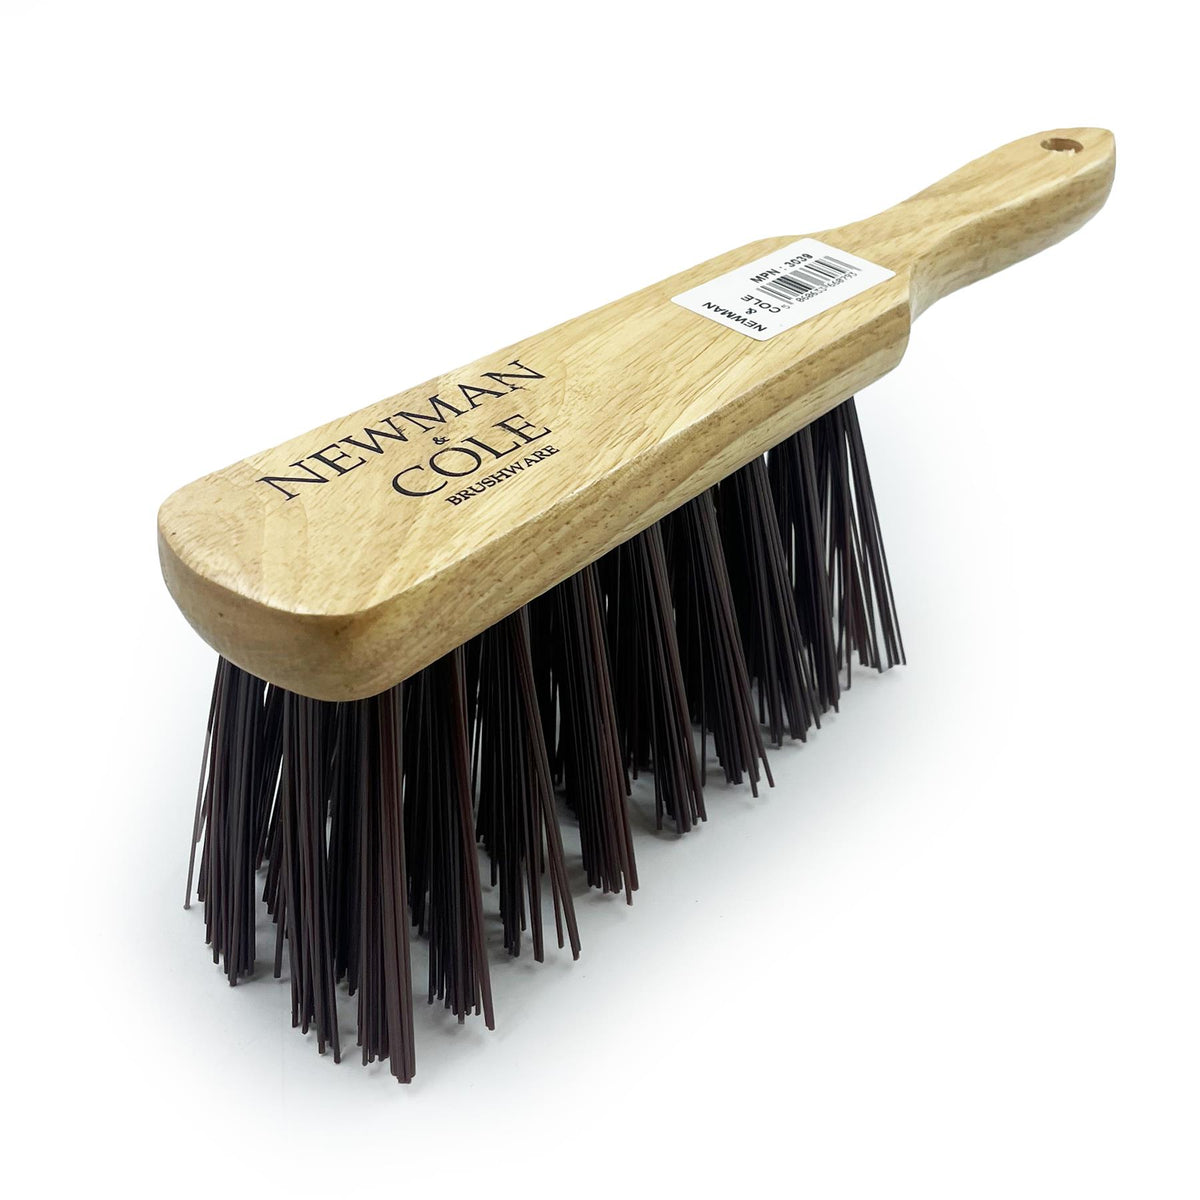 Newman and Cole Varnished Stiff PVC Hand Brush